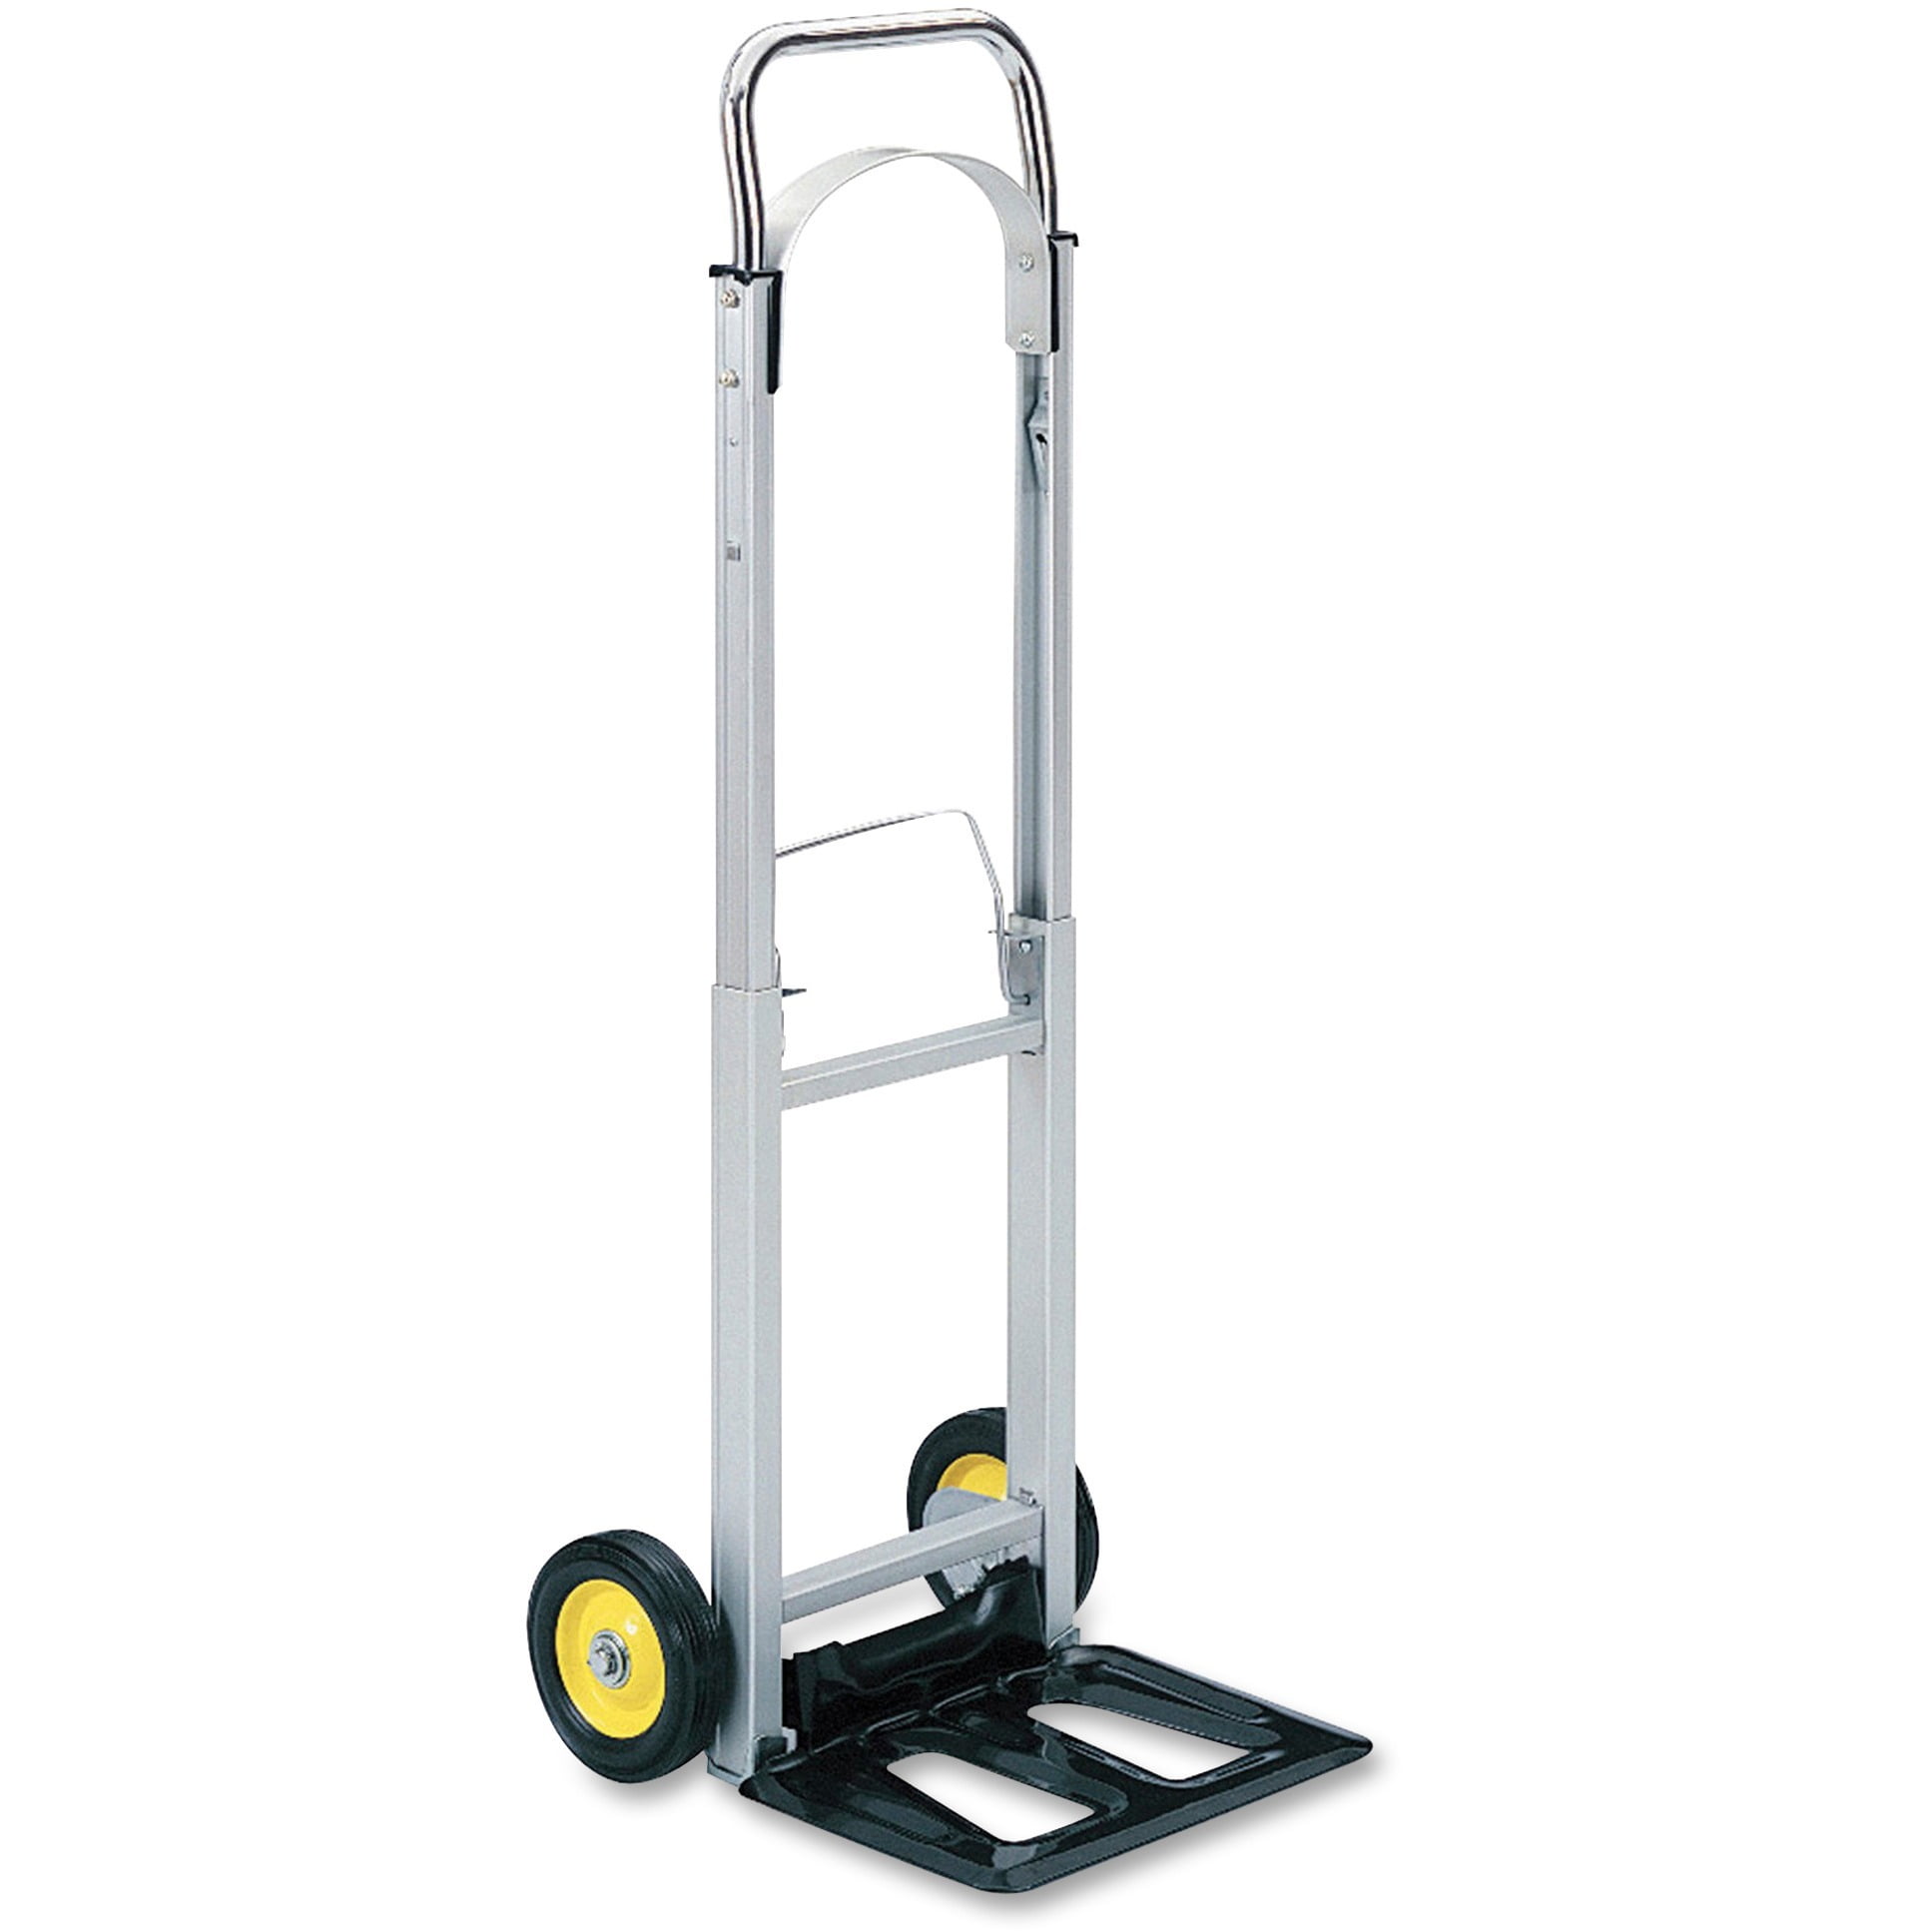 Telescoping Handle Collapsible 500 lbs Capacity Safco Products Stow Away Heavy-Duty Hand Truck 4055NC 